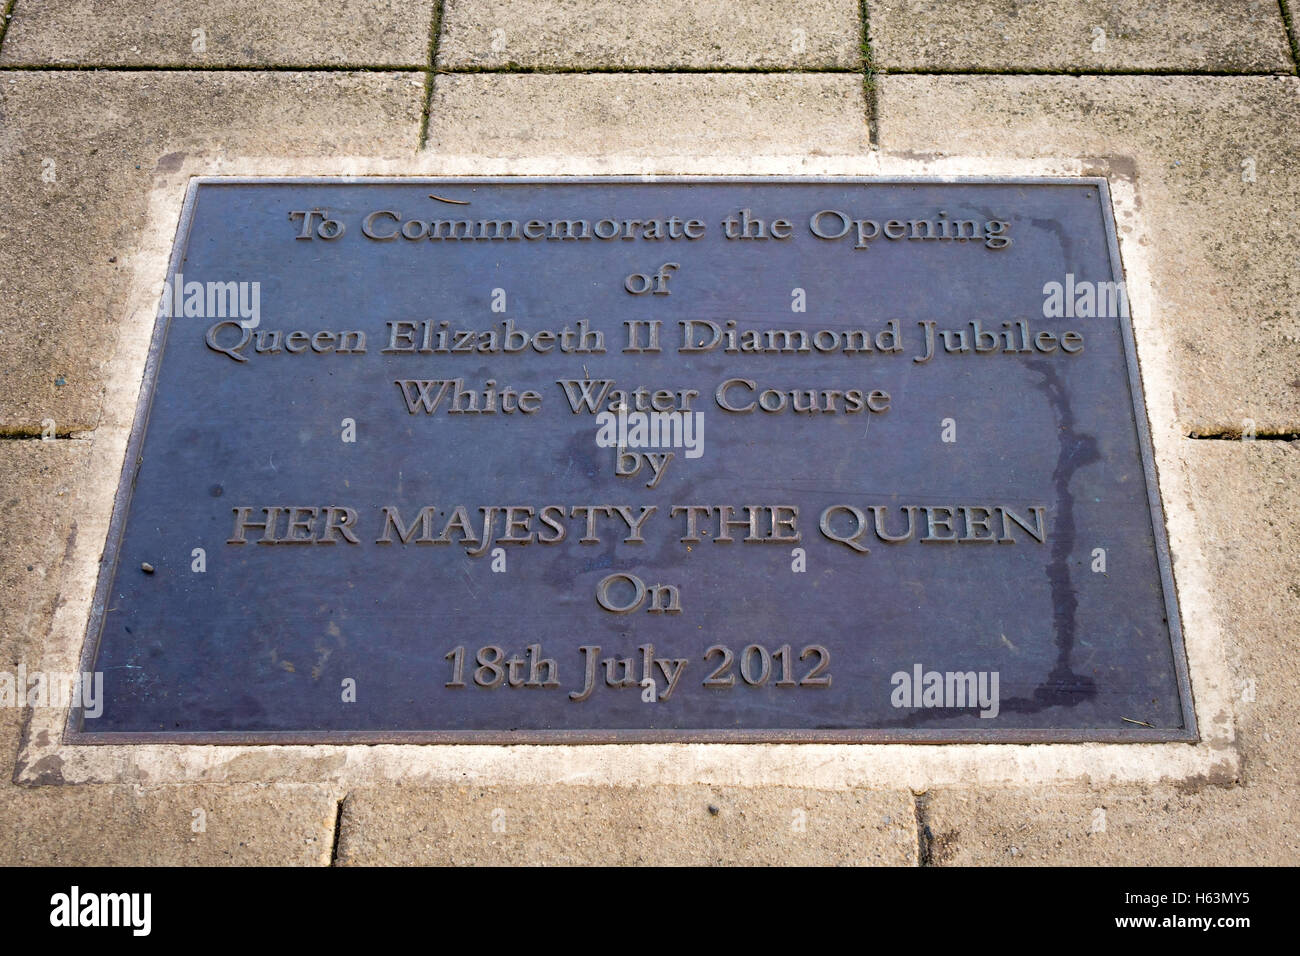 Bronze Plaque To Commemorate the Opening of Queen Elizabeth ll Diamond Jubilee White Water Course by HM The Queen 18th July 2012 Stock Photo